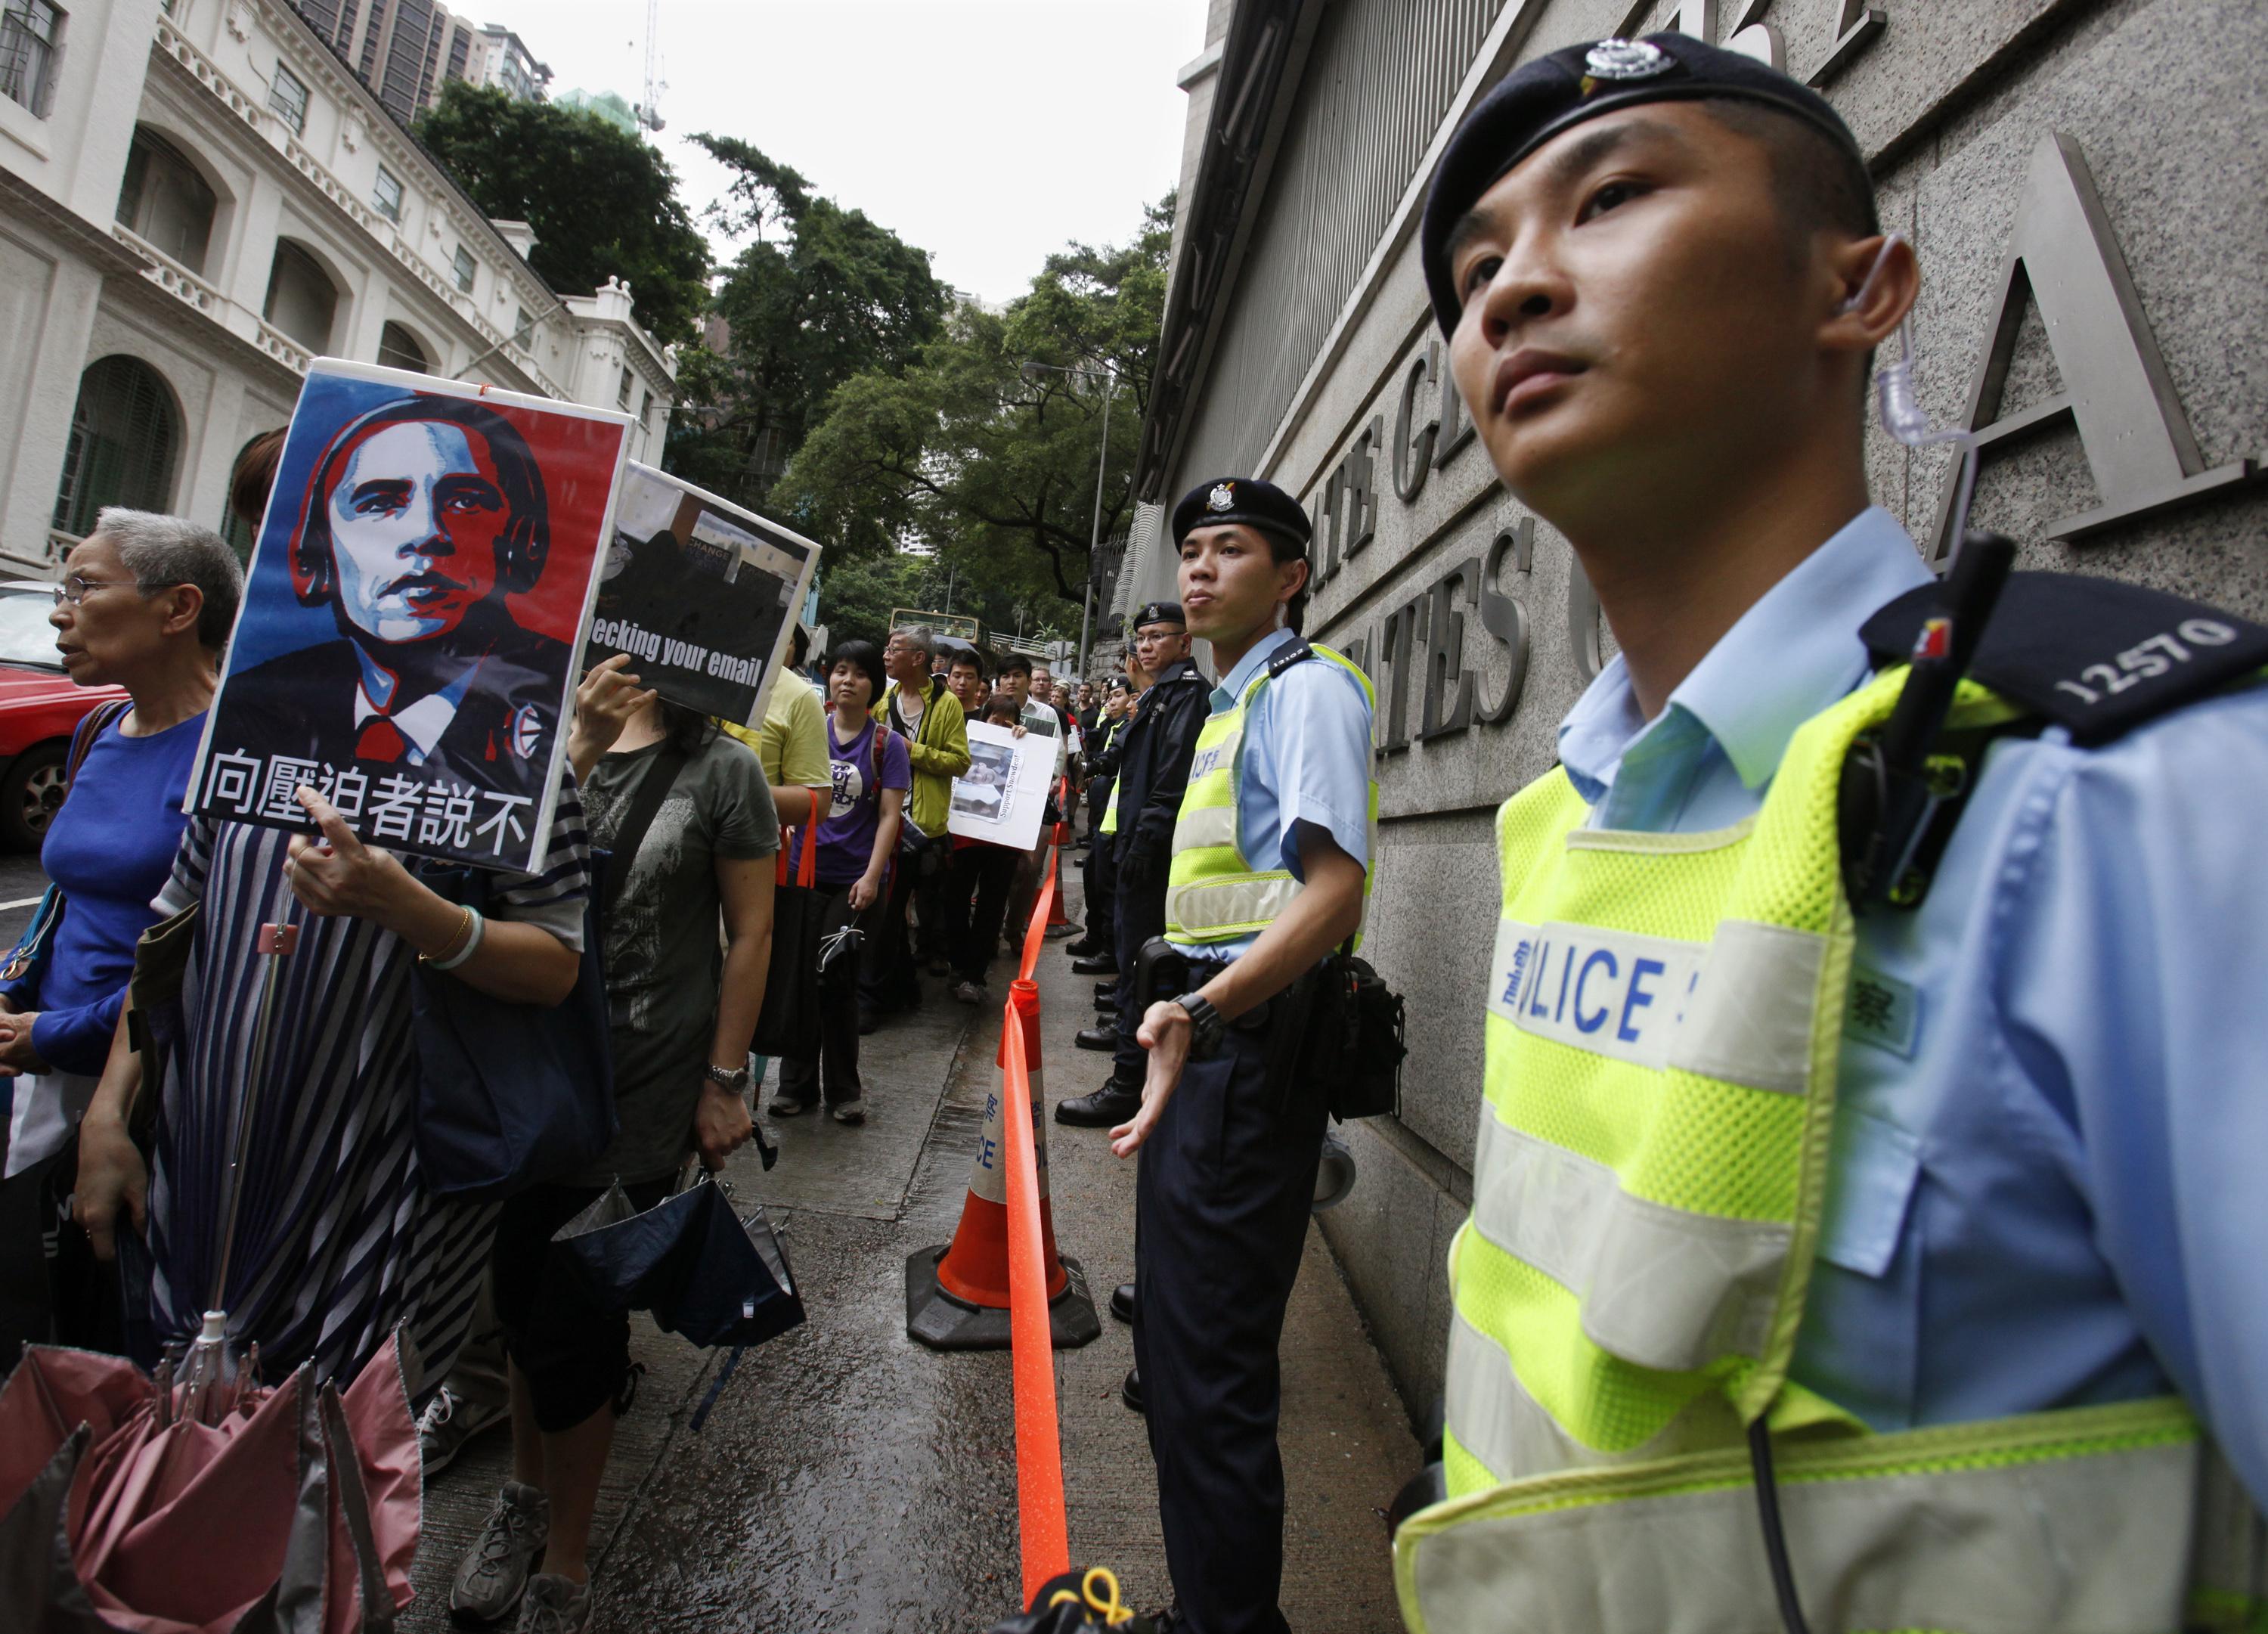 HK rally backs Snowden, denounces allegations of U.S. spying